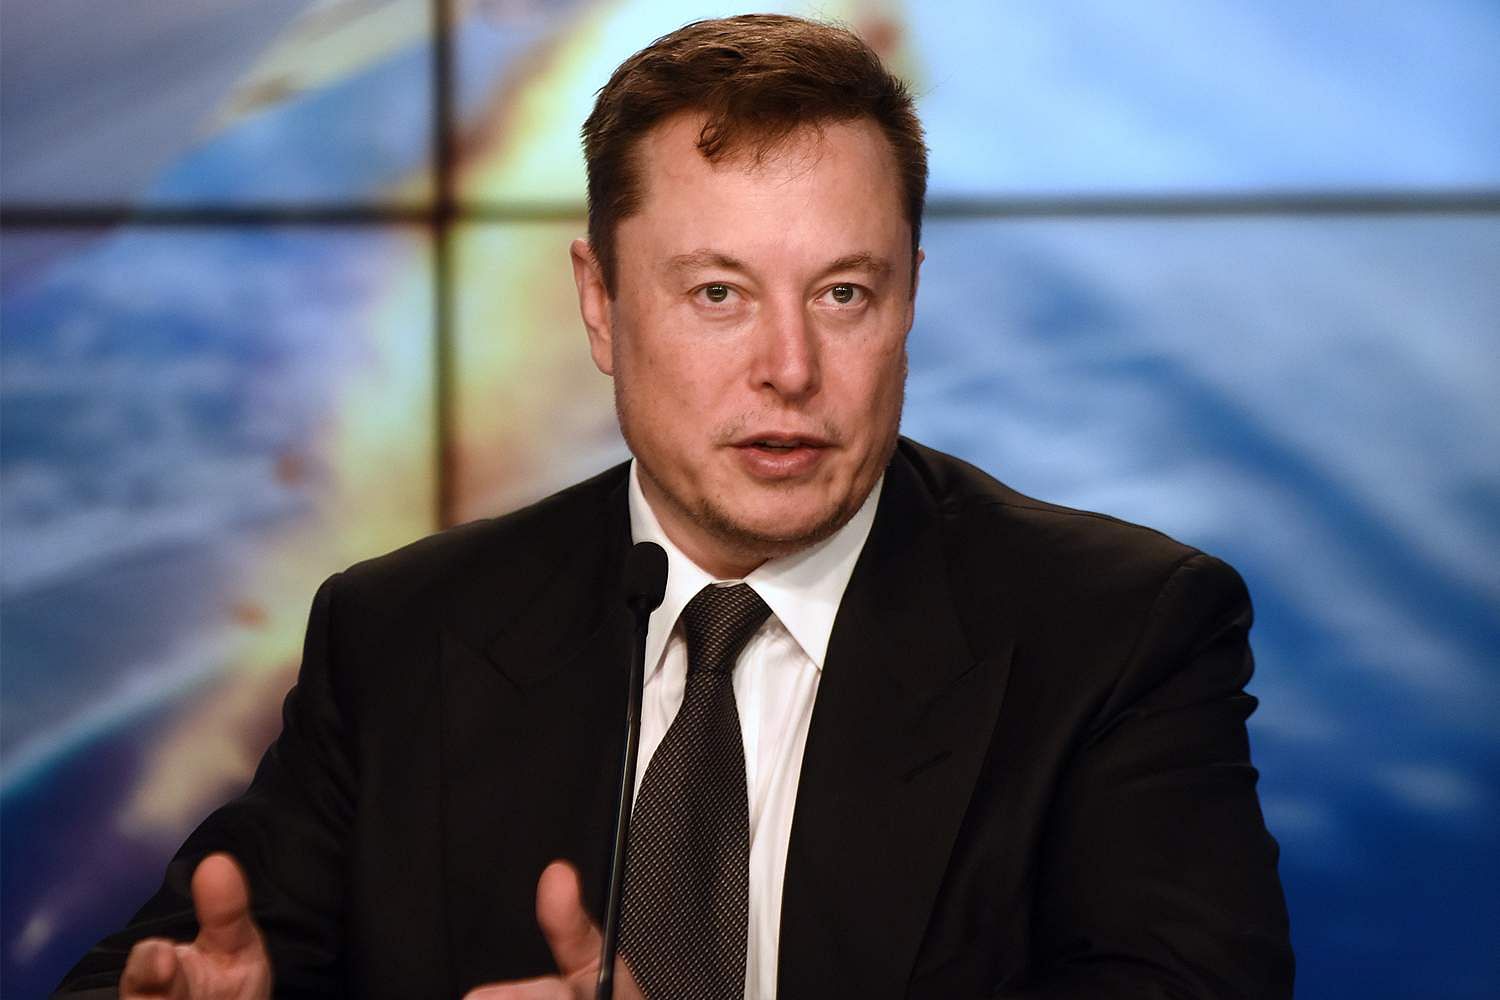 Elon Musk’s Twitter takeover has disrupted the Christchurch Call – NZ needs to rethink its …